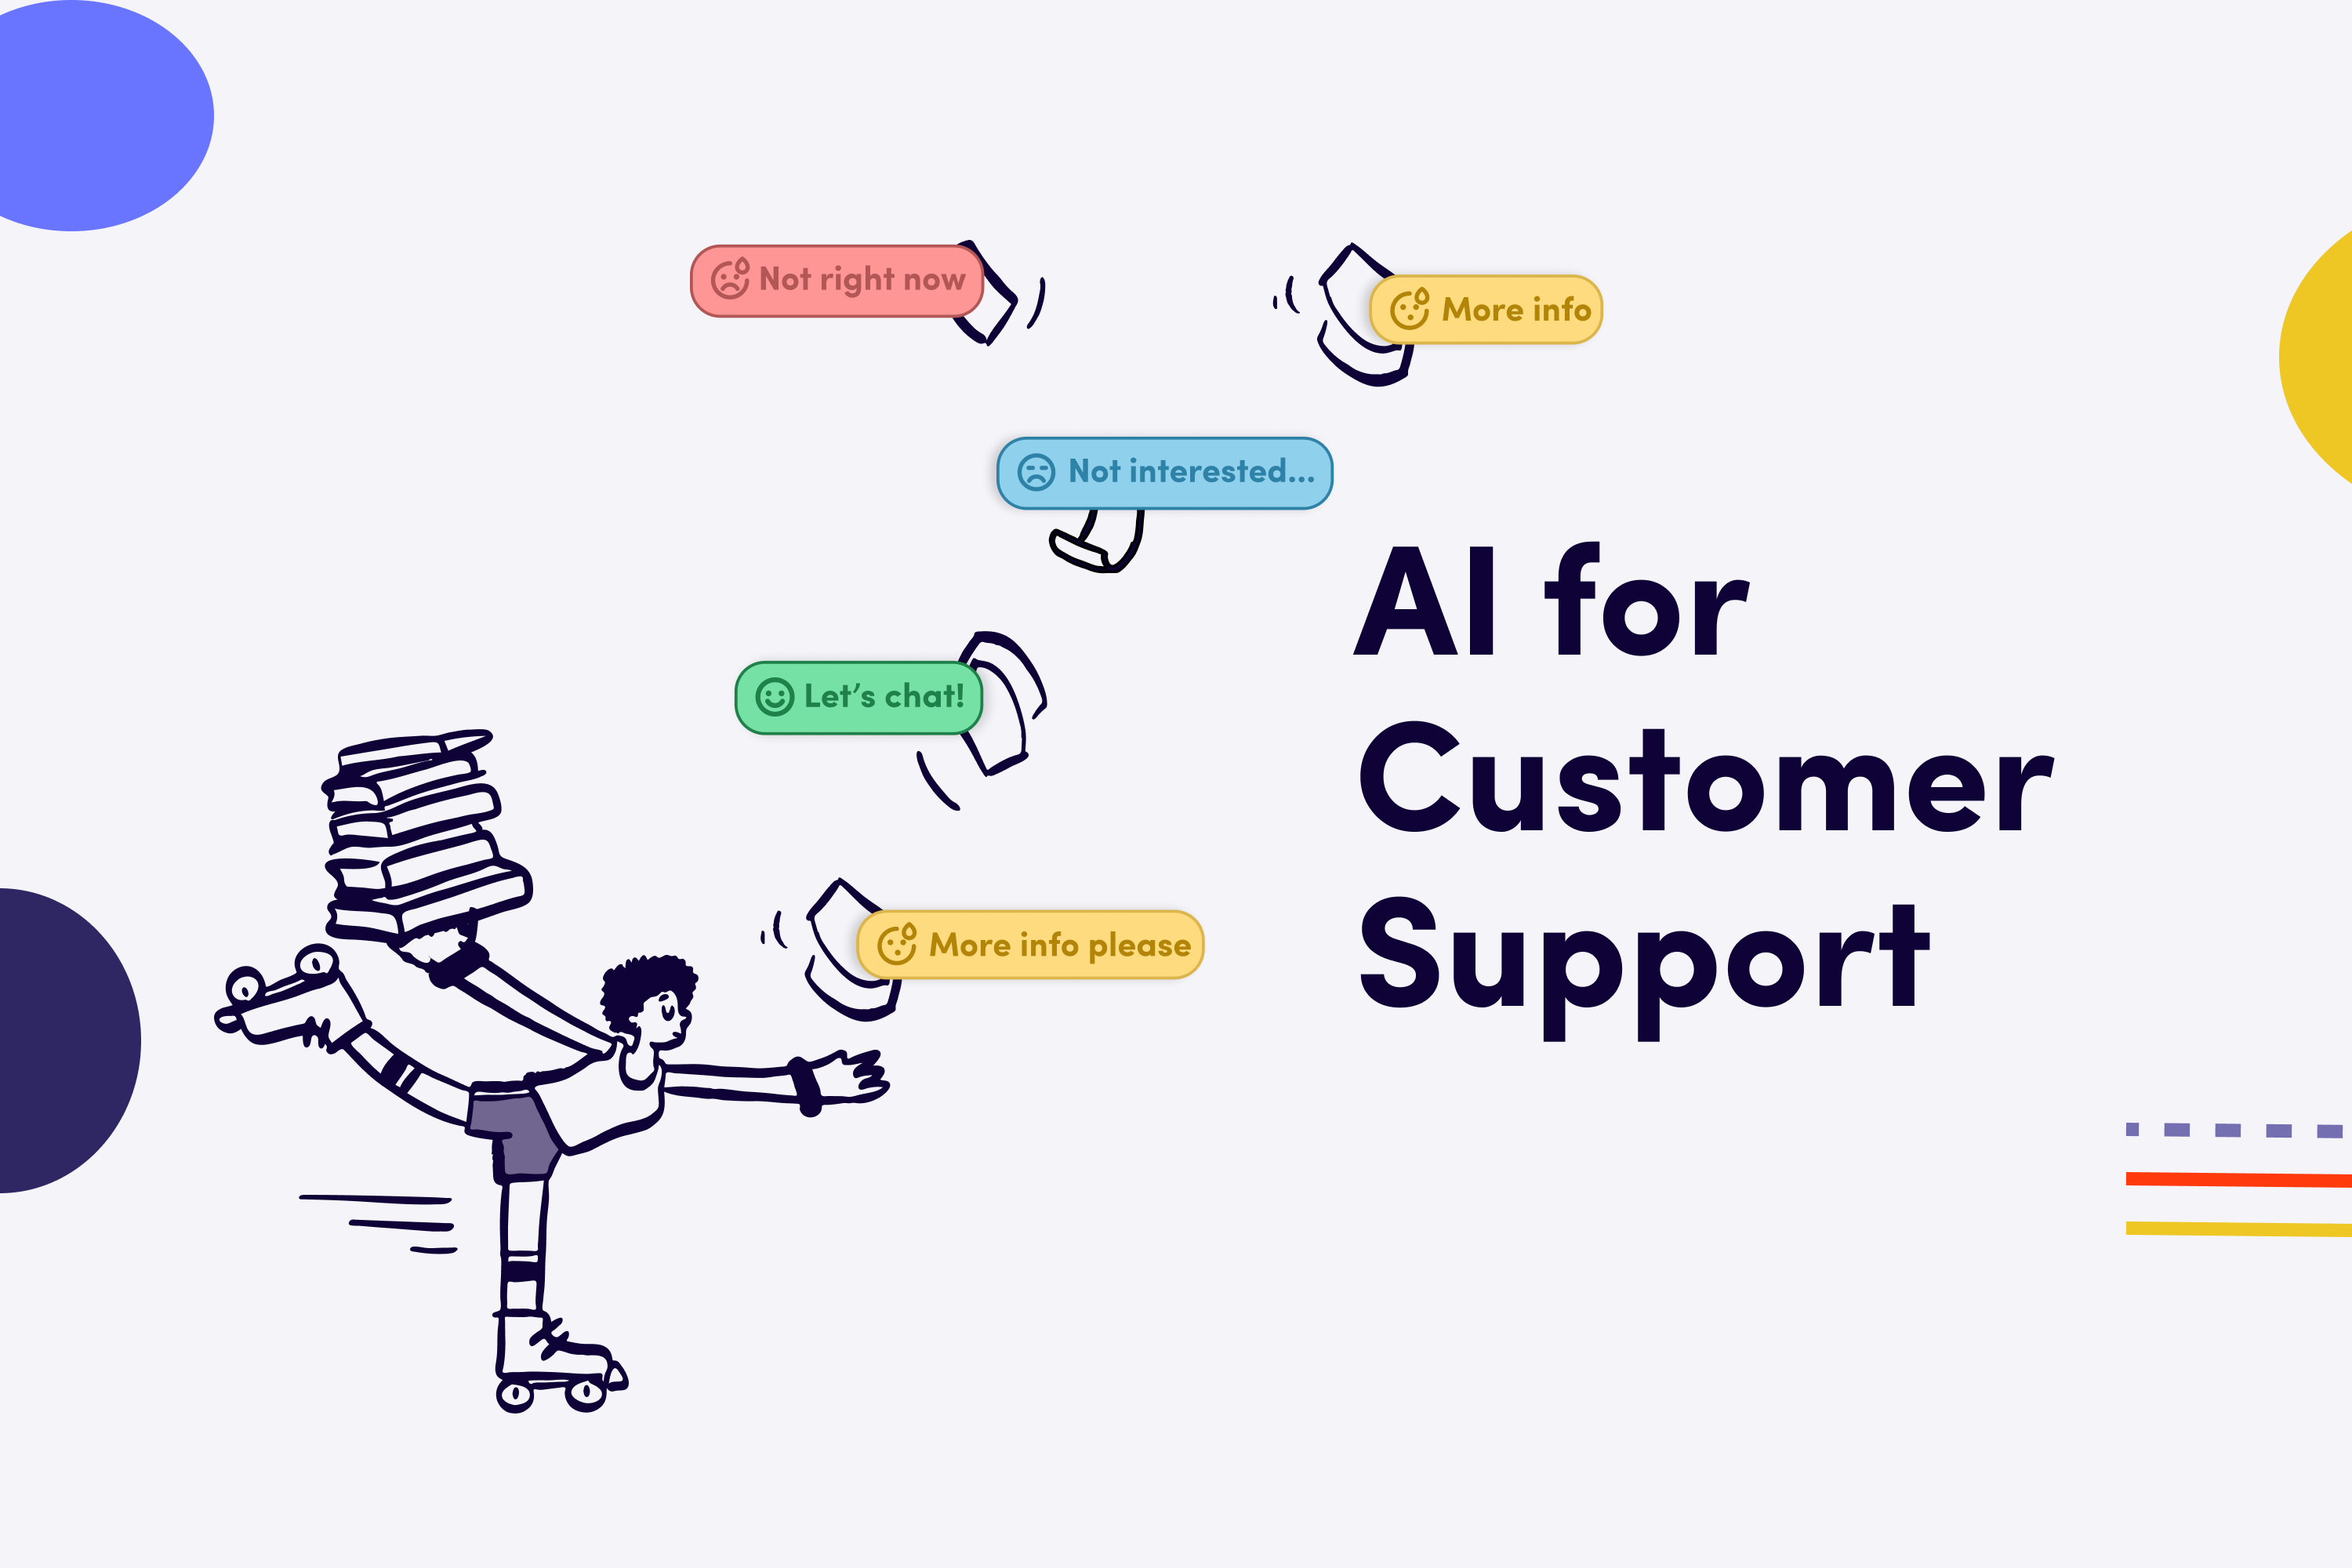 62ab146b9902c444f2530b00_Blog Post- AI for Customer Support_withtitle_02.06.22